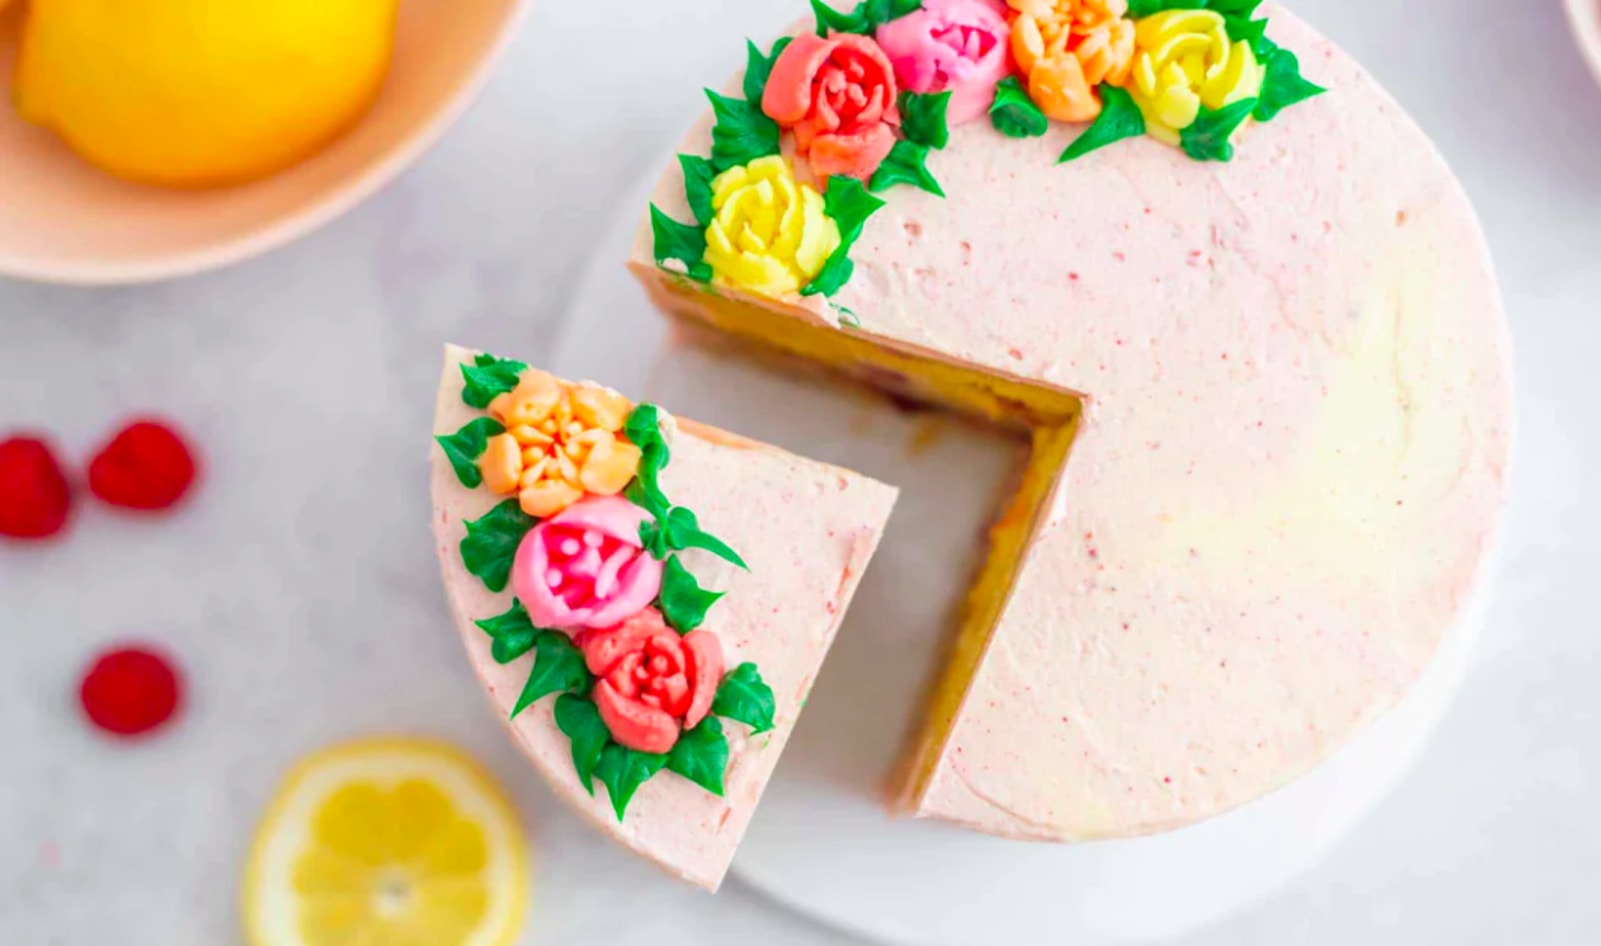 8 Vegan Cakes That Can Be On Your Doorstep This Week